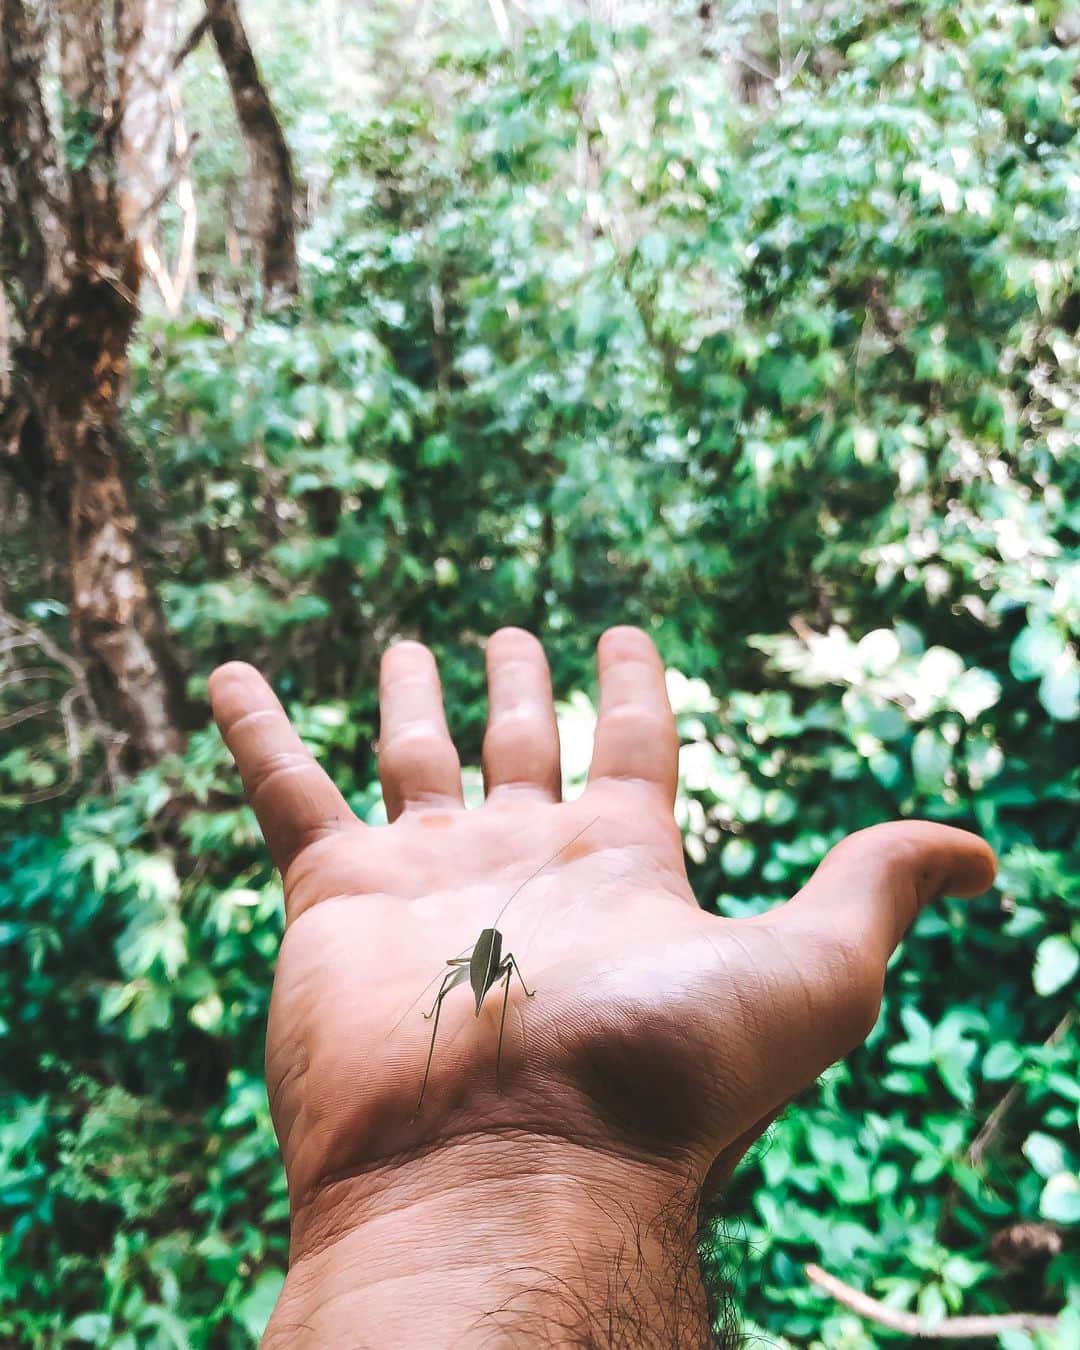 Ricardo Baldinのインスタグラム：「It took me time to develop such respect to nature and its cycles. I indeed learned in school a lot about the importance about conservation, but the entire society that surrounded me was going the exact opposite way. And honestly, not much have changed. We definitely need to take better care of our planet, not only for Earth’s sake, but for our own! The planet has hosted many species over the millions of years of its existence, and you can all be sure that, if humanity is extinct, there will still be life in here, nature has a lot of power for restoration, if we give Her time. In other words, The future of our species is in our hands. Consider diminishing meat consumption, taking better care of your trash management, start your own compost and vegetable garden, maybe plant a tree with the seeds you’d usually throw away. Little steps that brings us closer to our Mother Nature. Much love to you all. 🍃 #earth #nature #love #preserve」